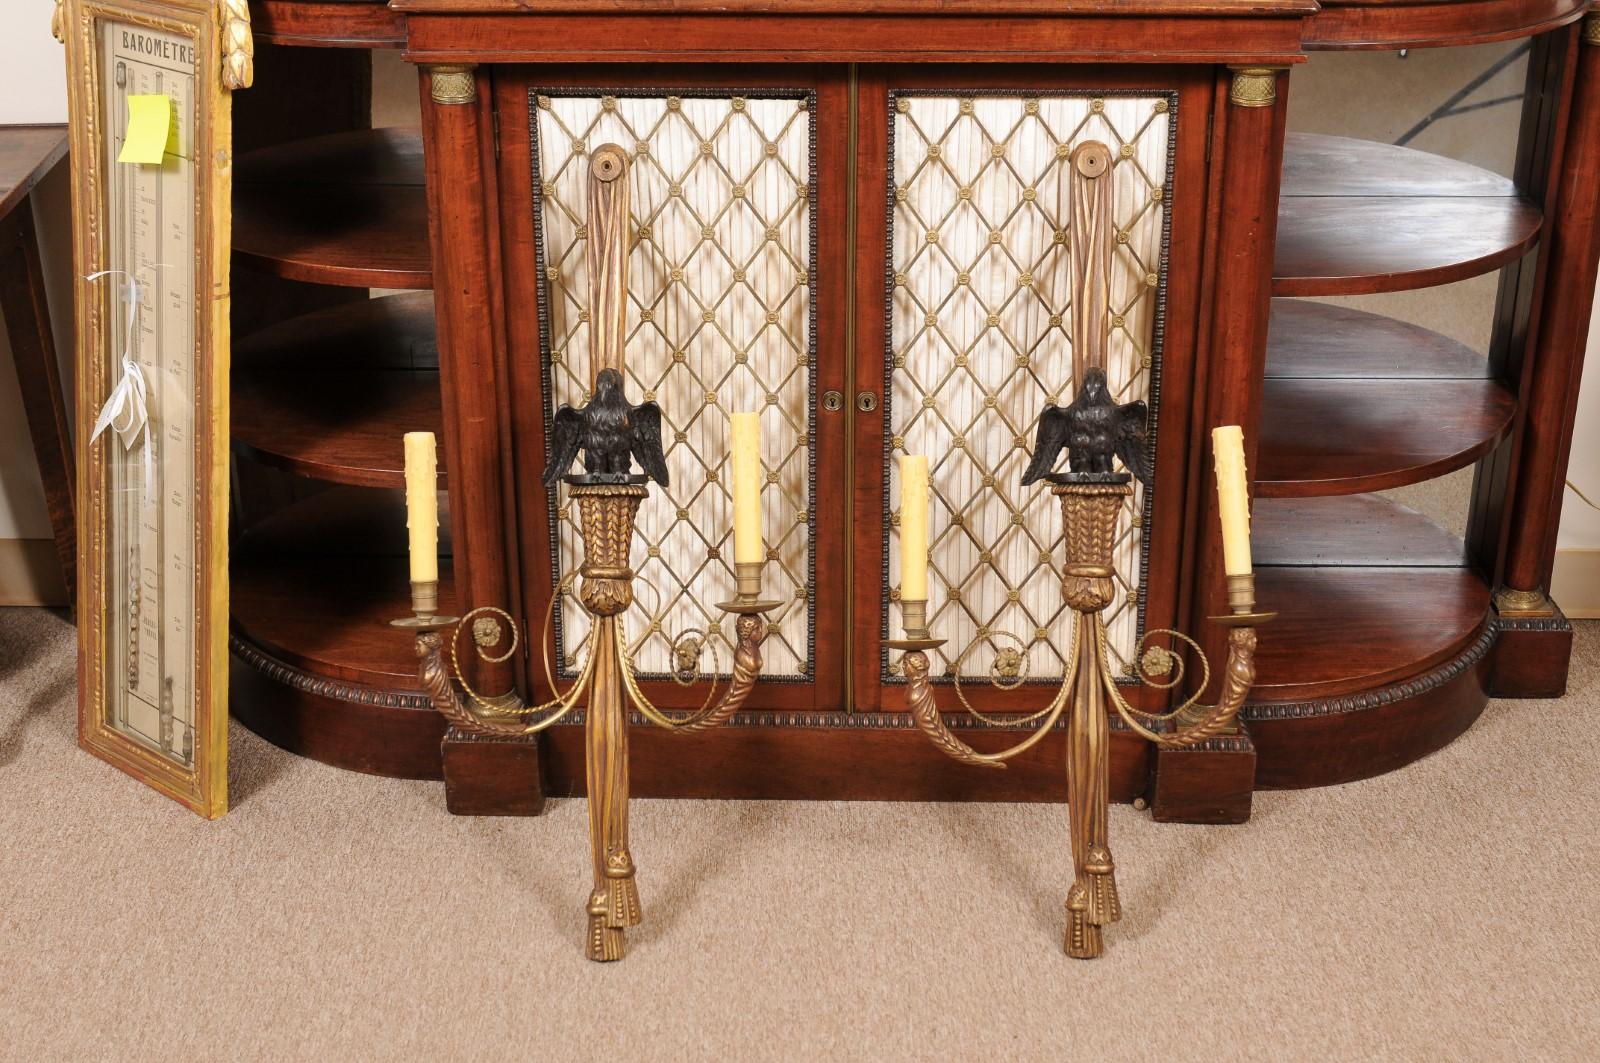  Pair of Giltwood Carved Eagle 2 Light Sconces with Tassle Detail, 20th Century In Good Condition For Sale In Atlanta, GA